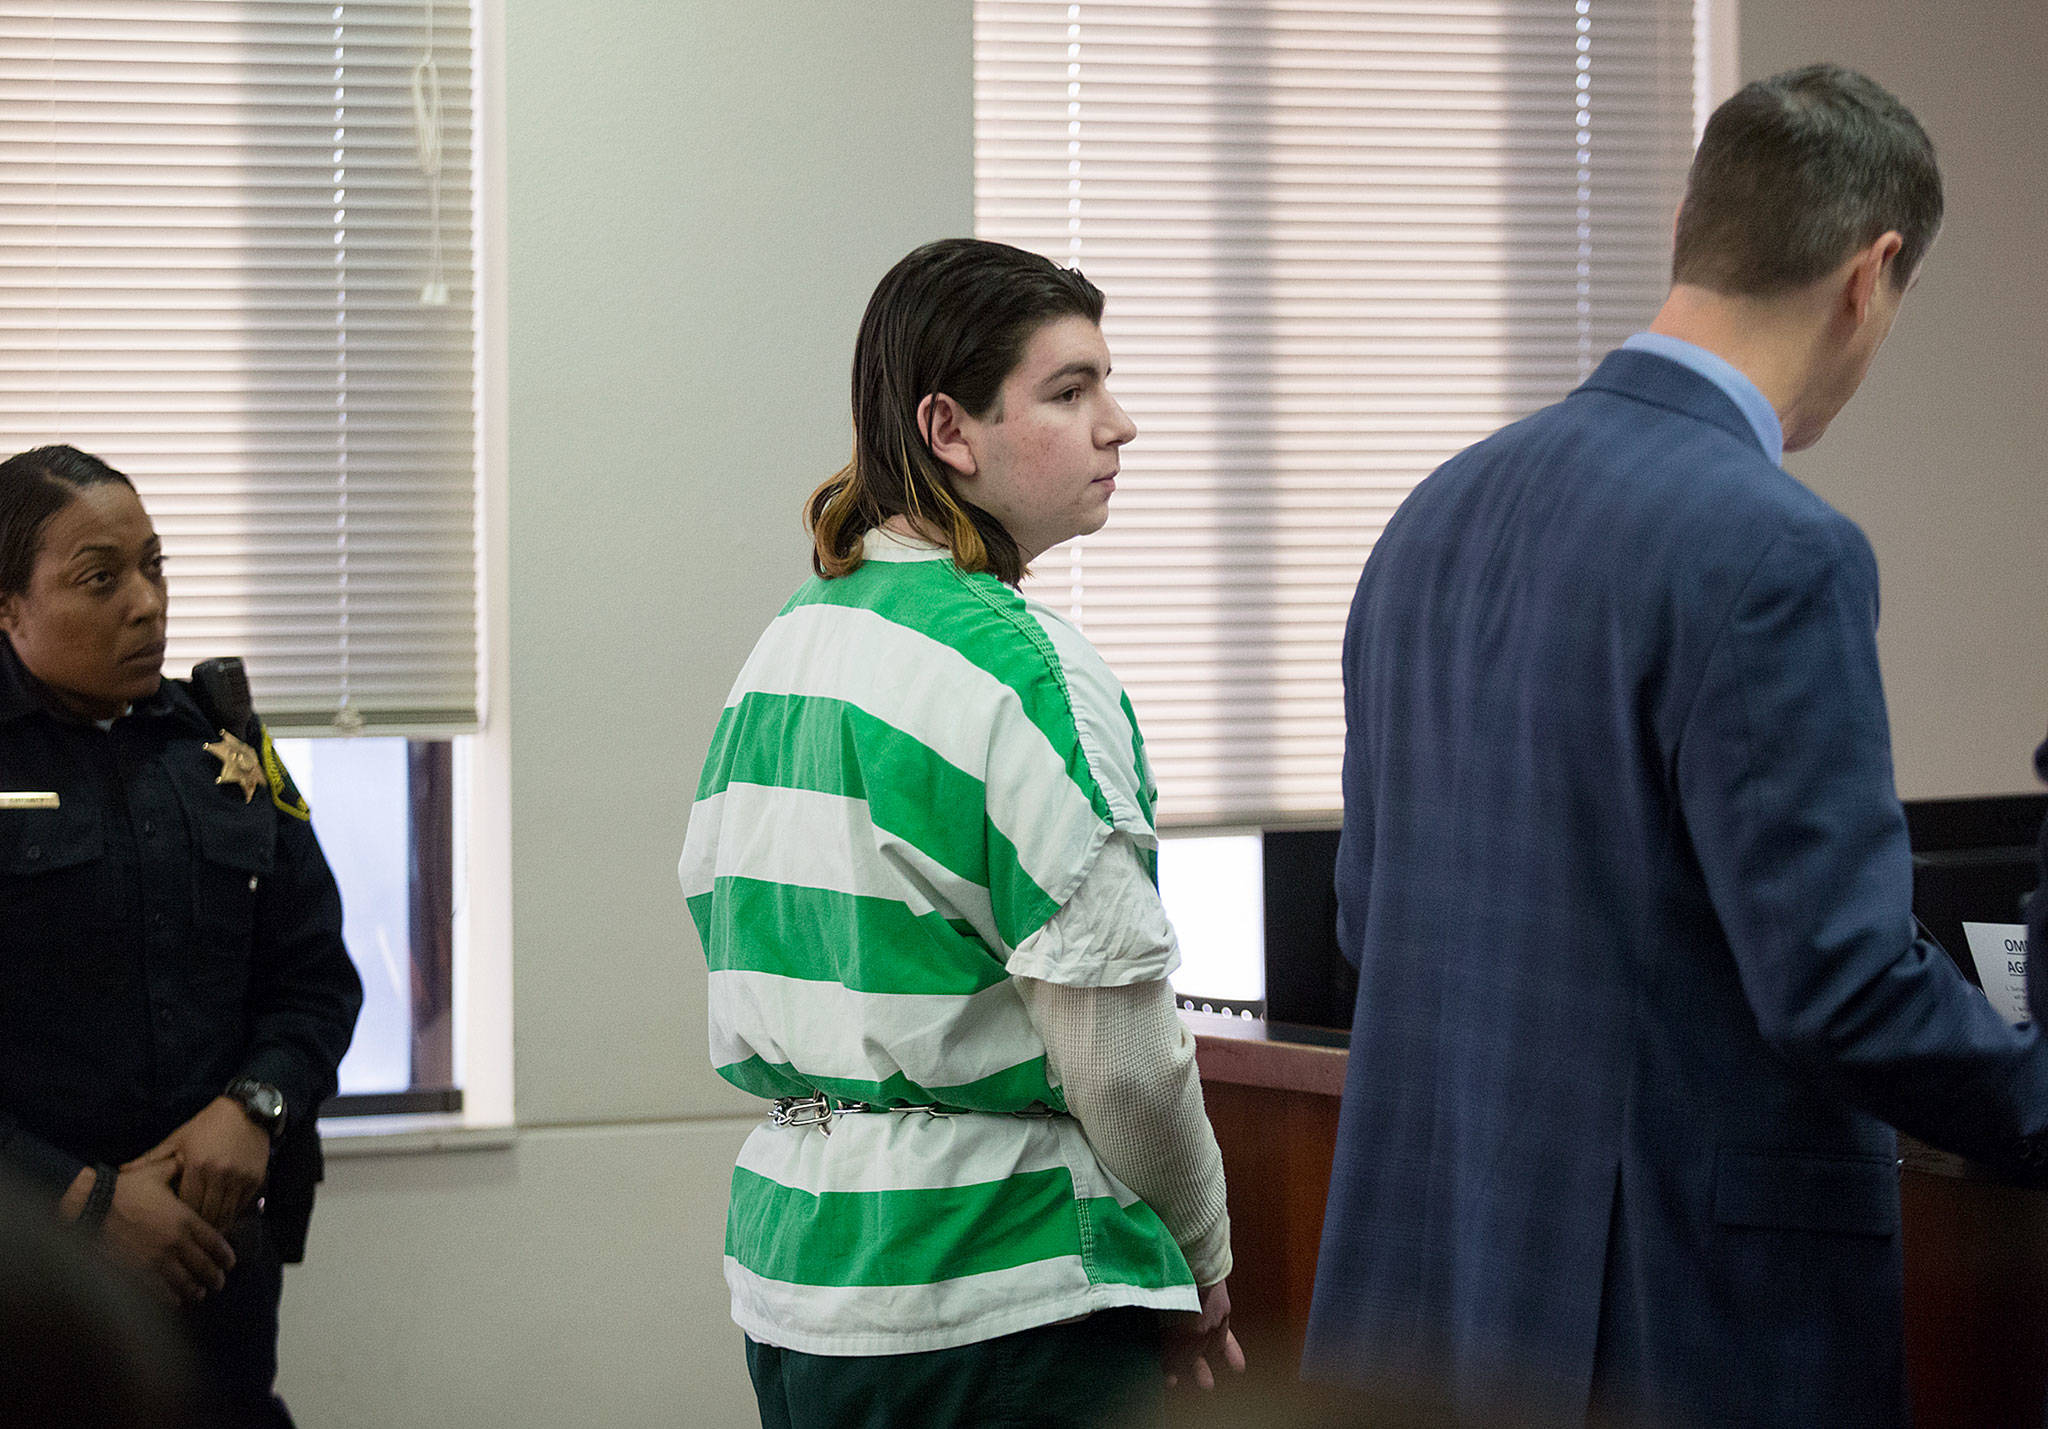 Joshua O’Connor listens to his attorney, before pleading guilty to charges that he plotted a school shooting, at the Snohomish County Courthouse on Thursday, Dec. 6, in Everett. (Andy Bronson / The Herald)